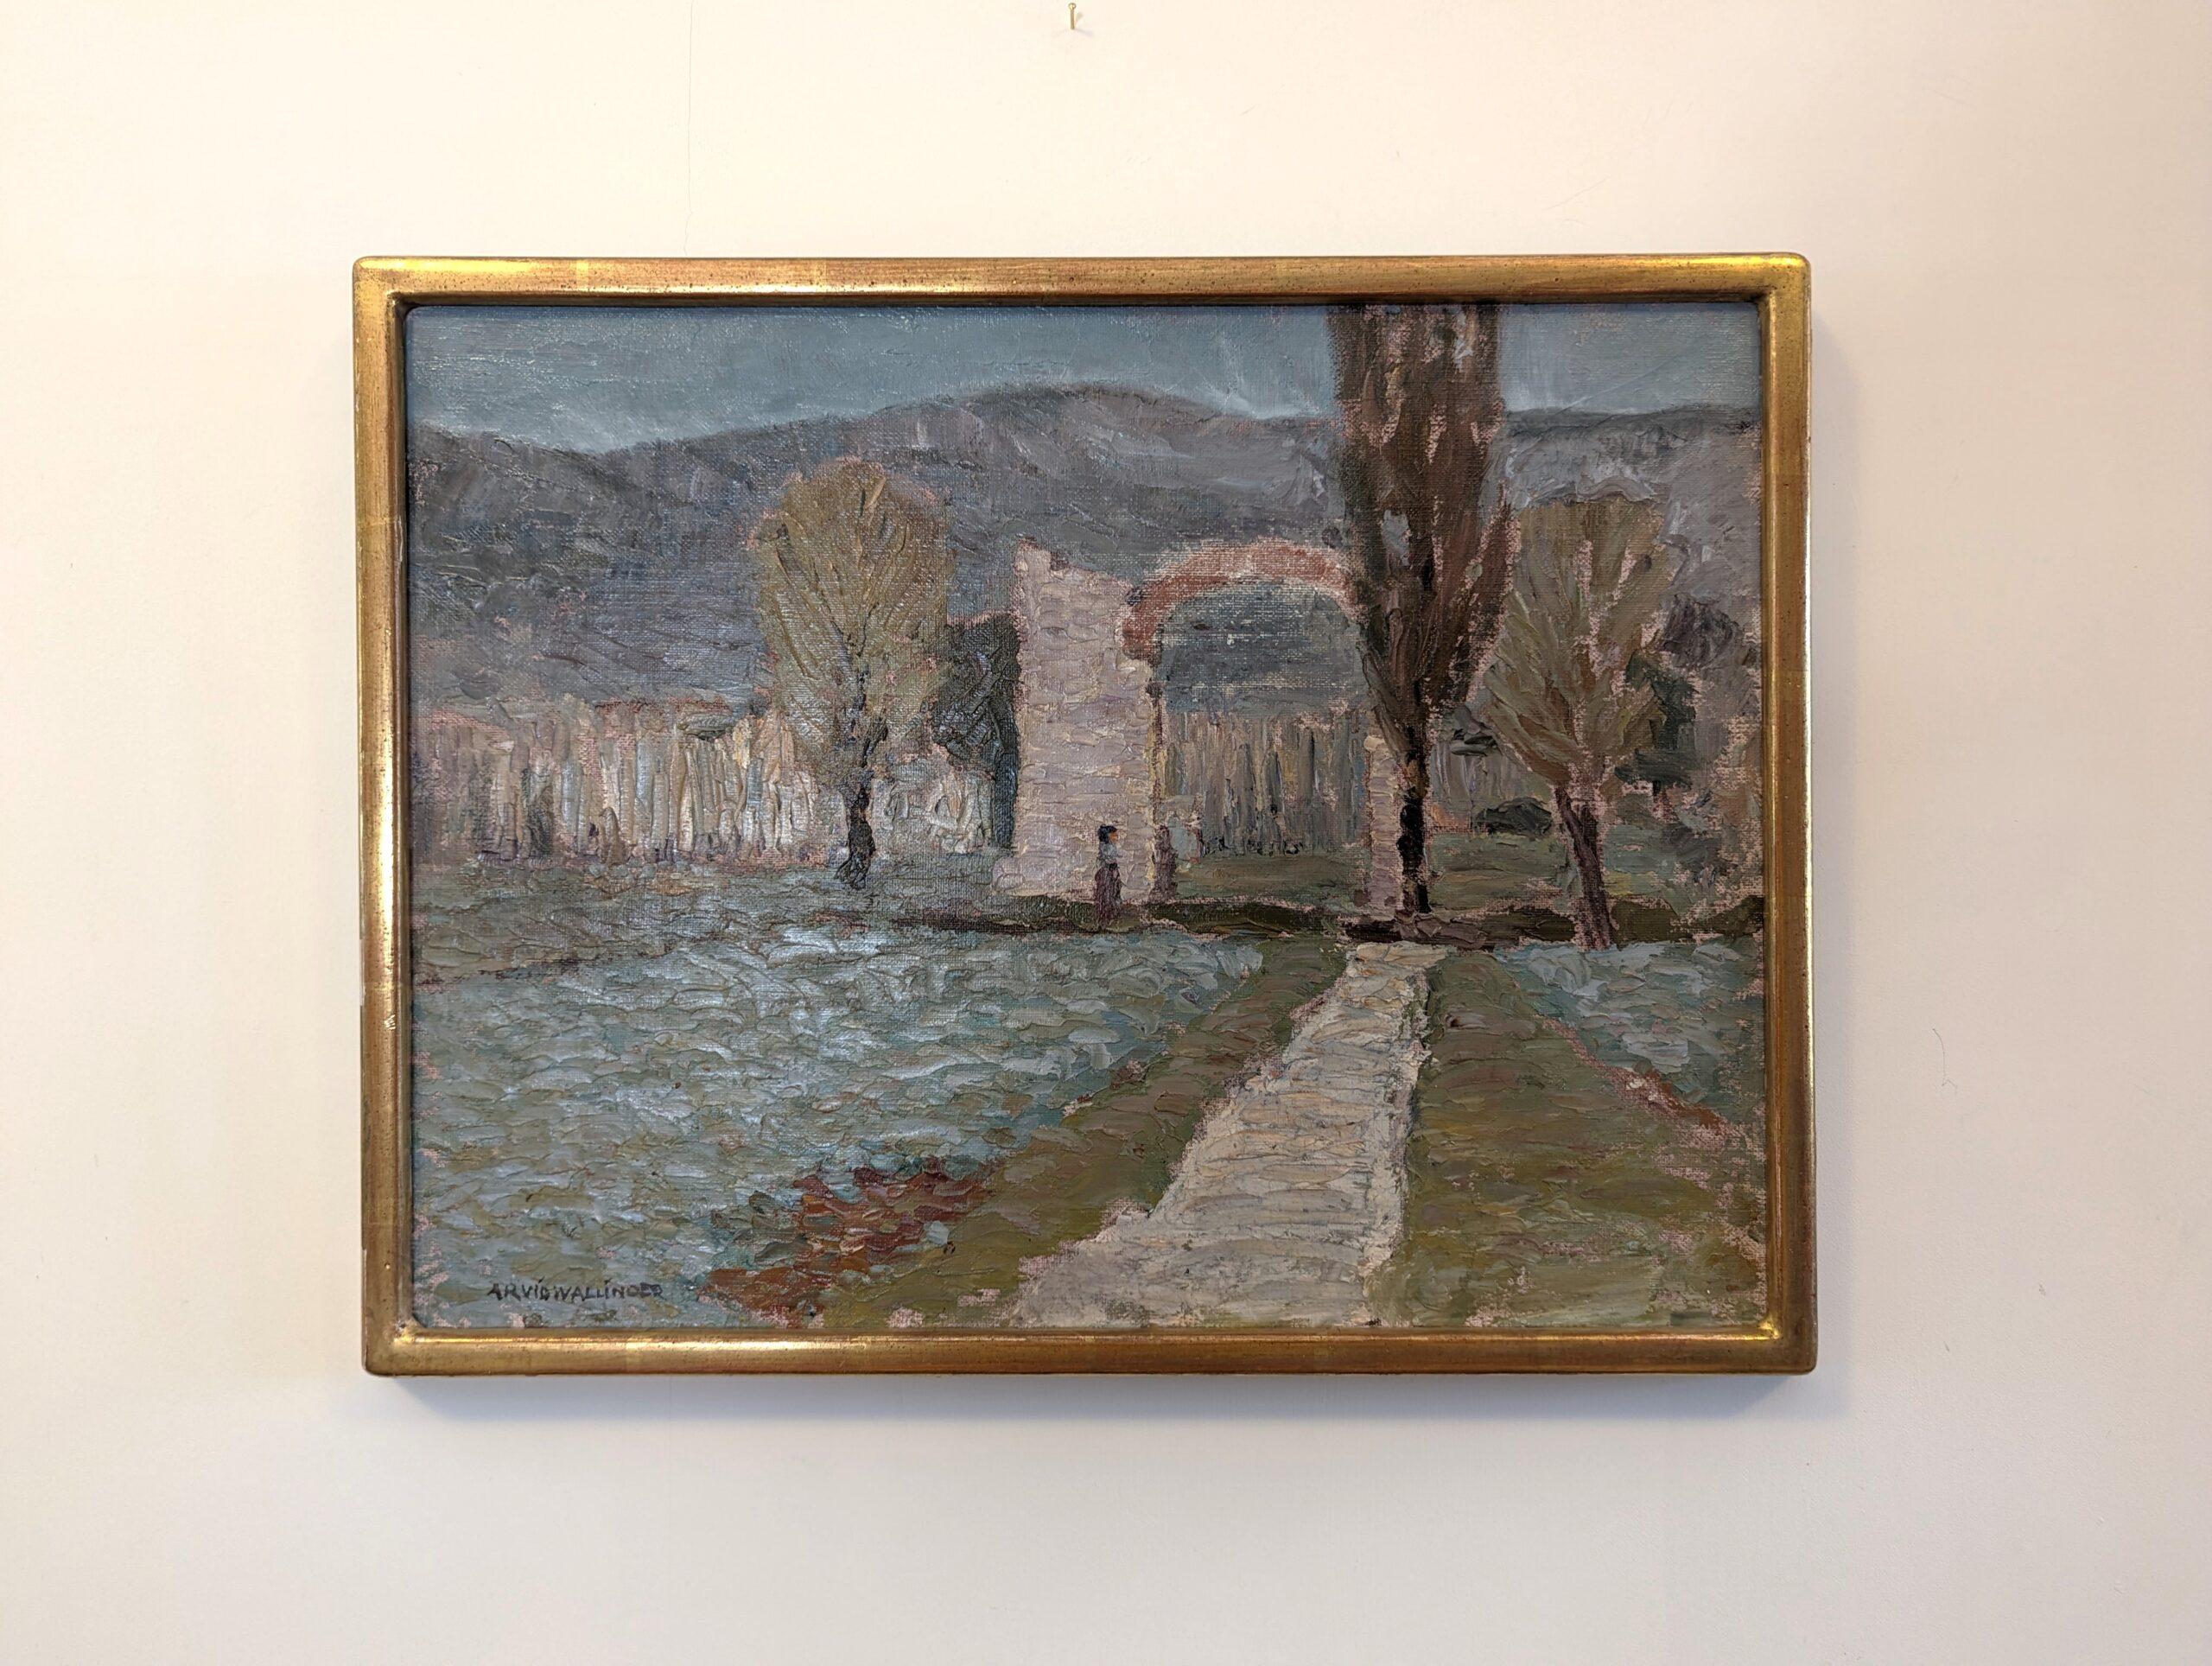 ITALIAN VALLEY
Size: 38 x 49 cm (including frame)
Oil on board

A beautifully textured and expressive modernist style landscape composition, painted in oil onto canvas and dated 1967 on reverse.

This atmospheric composition presents a garden